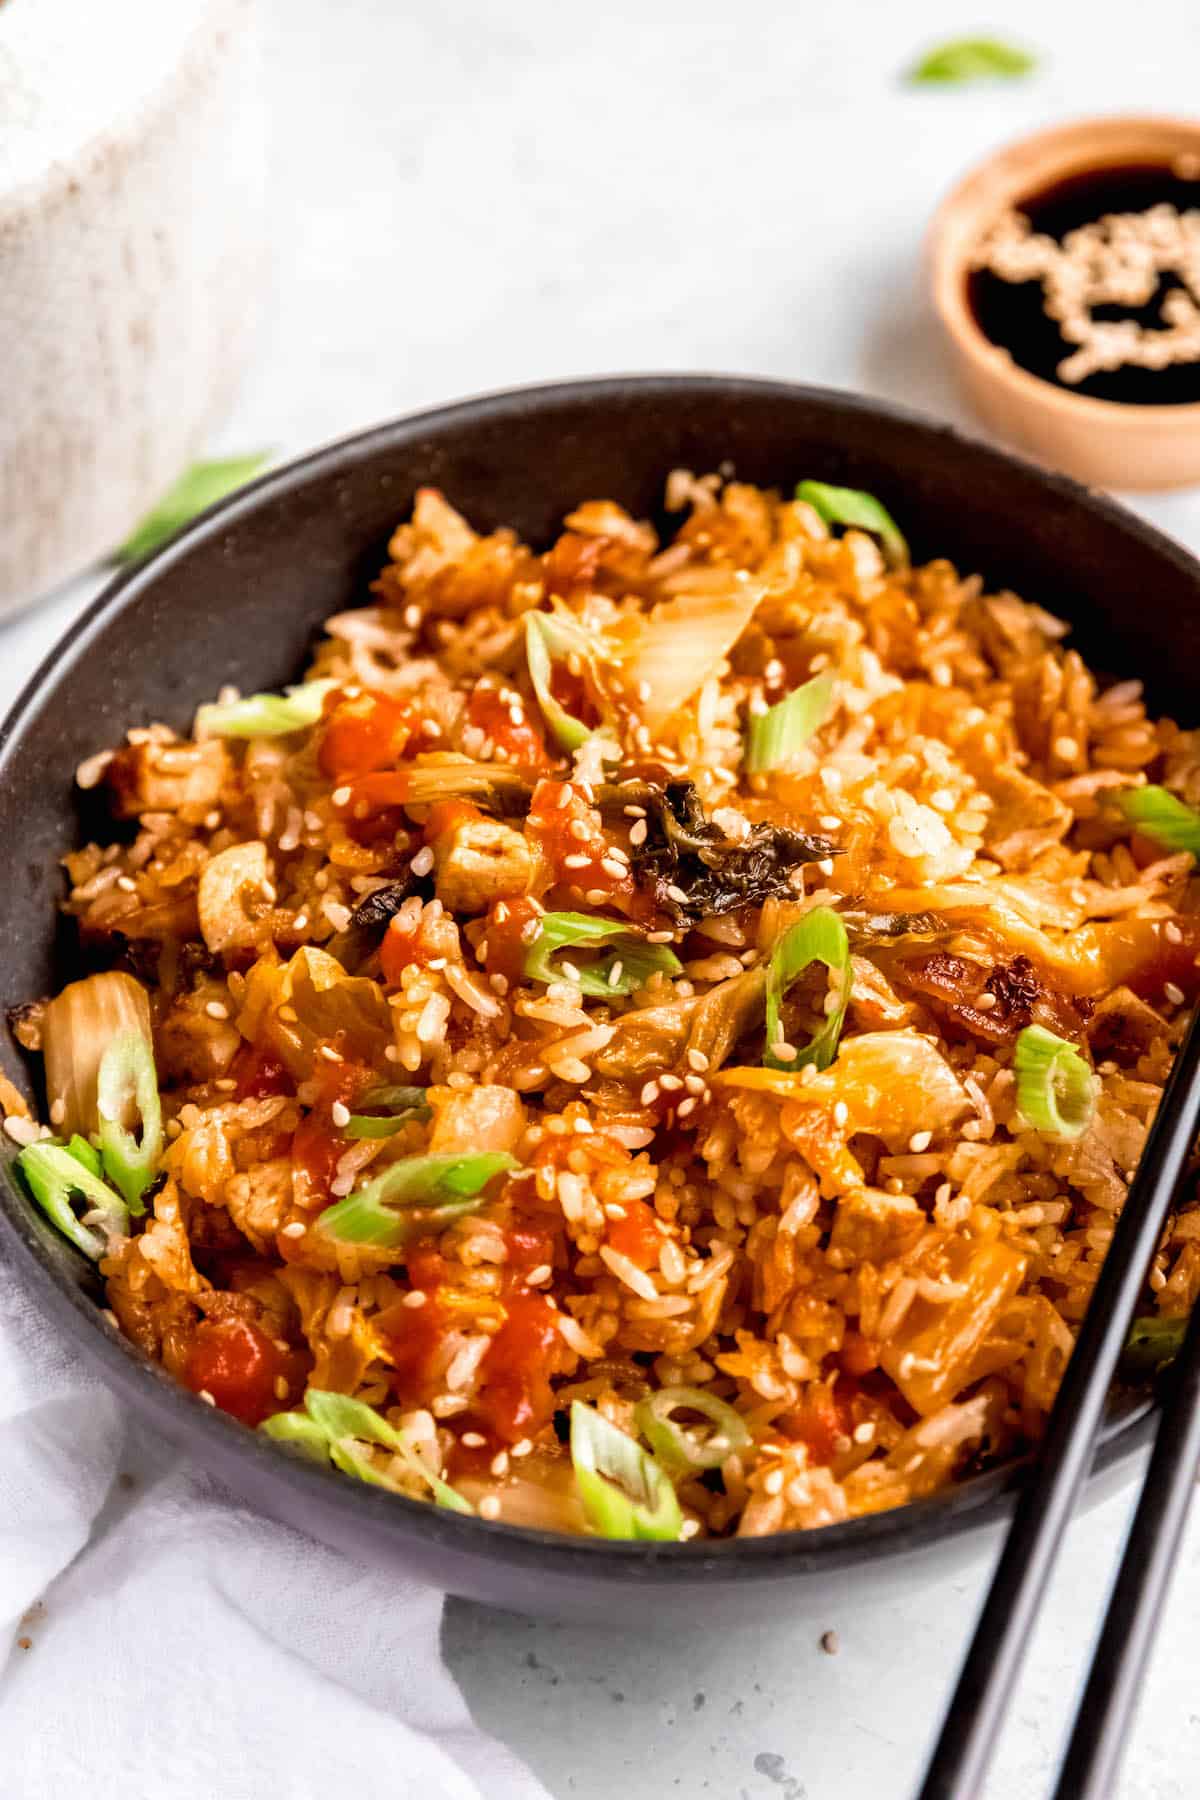 hero shot of a bowl of BBQ pork and gochujang fried rice garnished with scallions.